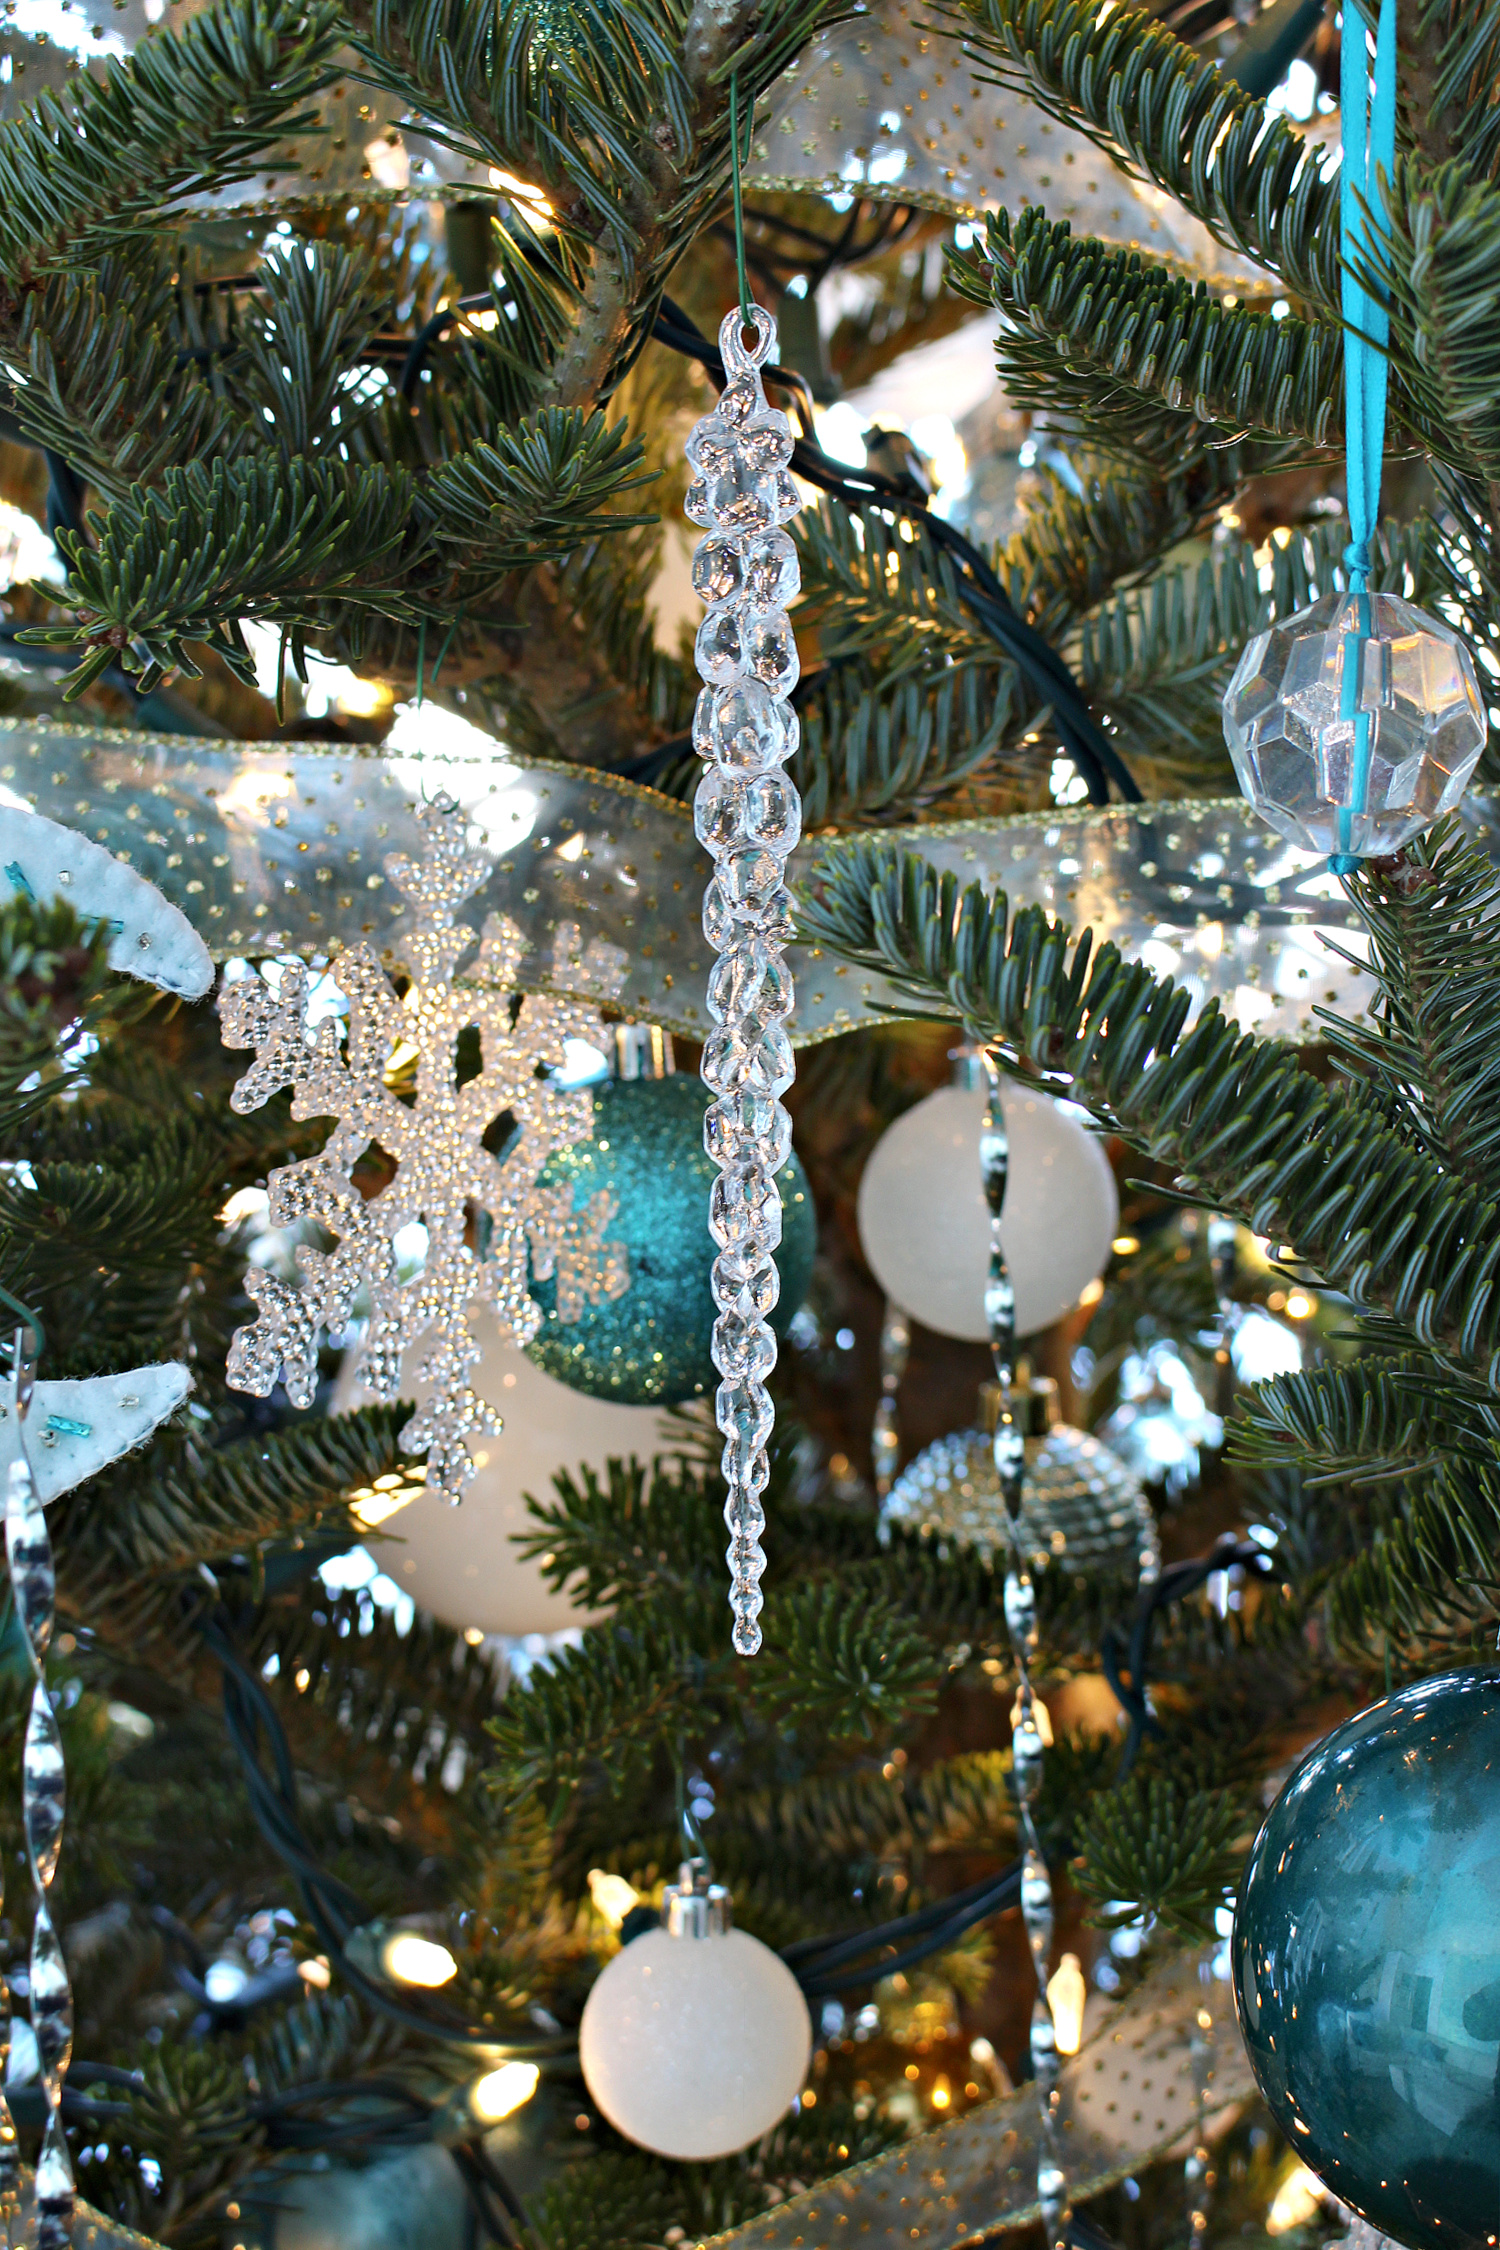 Where to Find Inexpensive Tree Ornaments